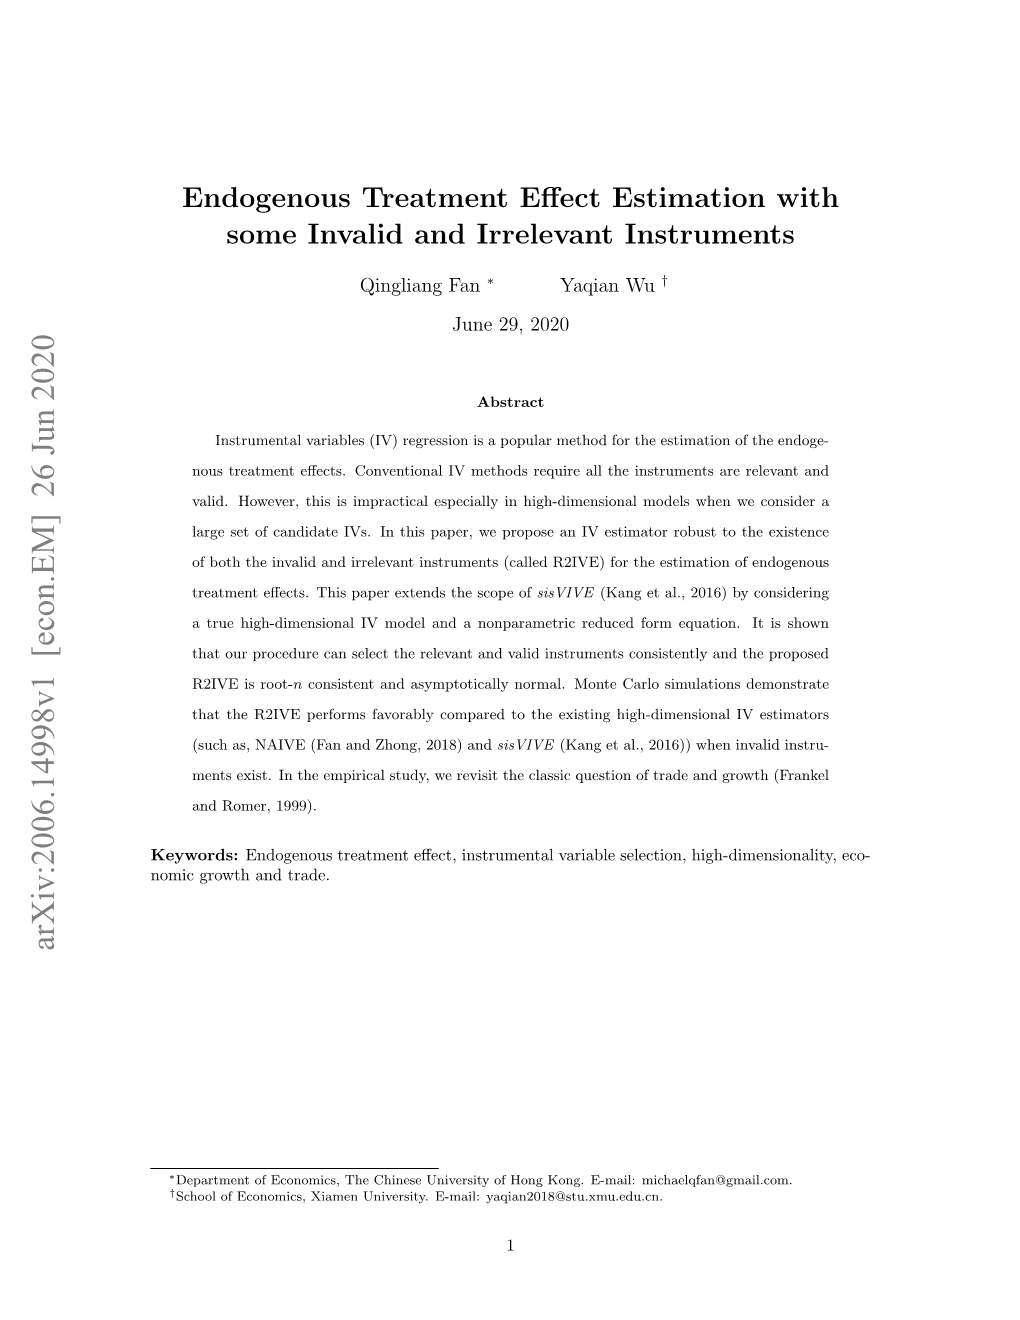 Endogenous Treatment Effect Estimation with Some Invalid